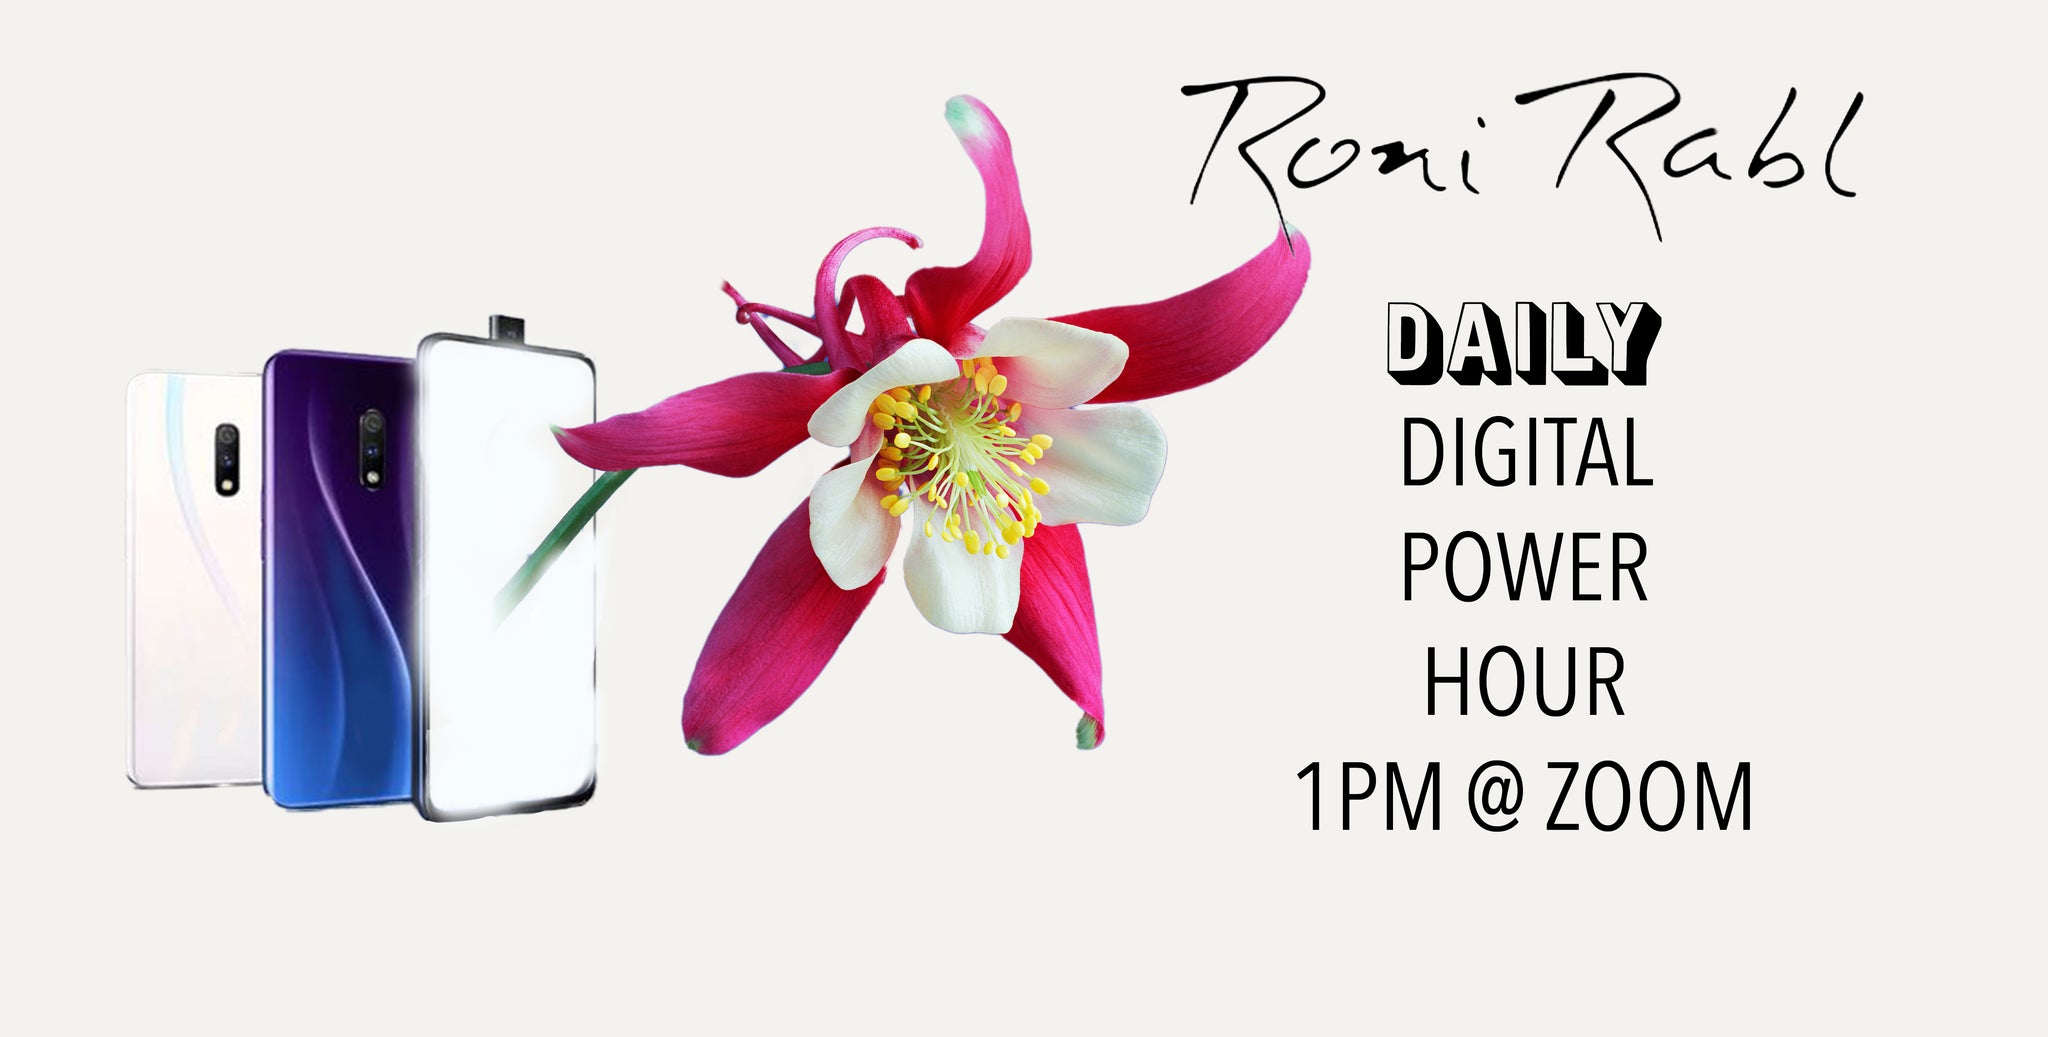 The Roni Rabl Digital Power Hour Comprehensive Guide (Updating)